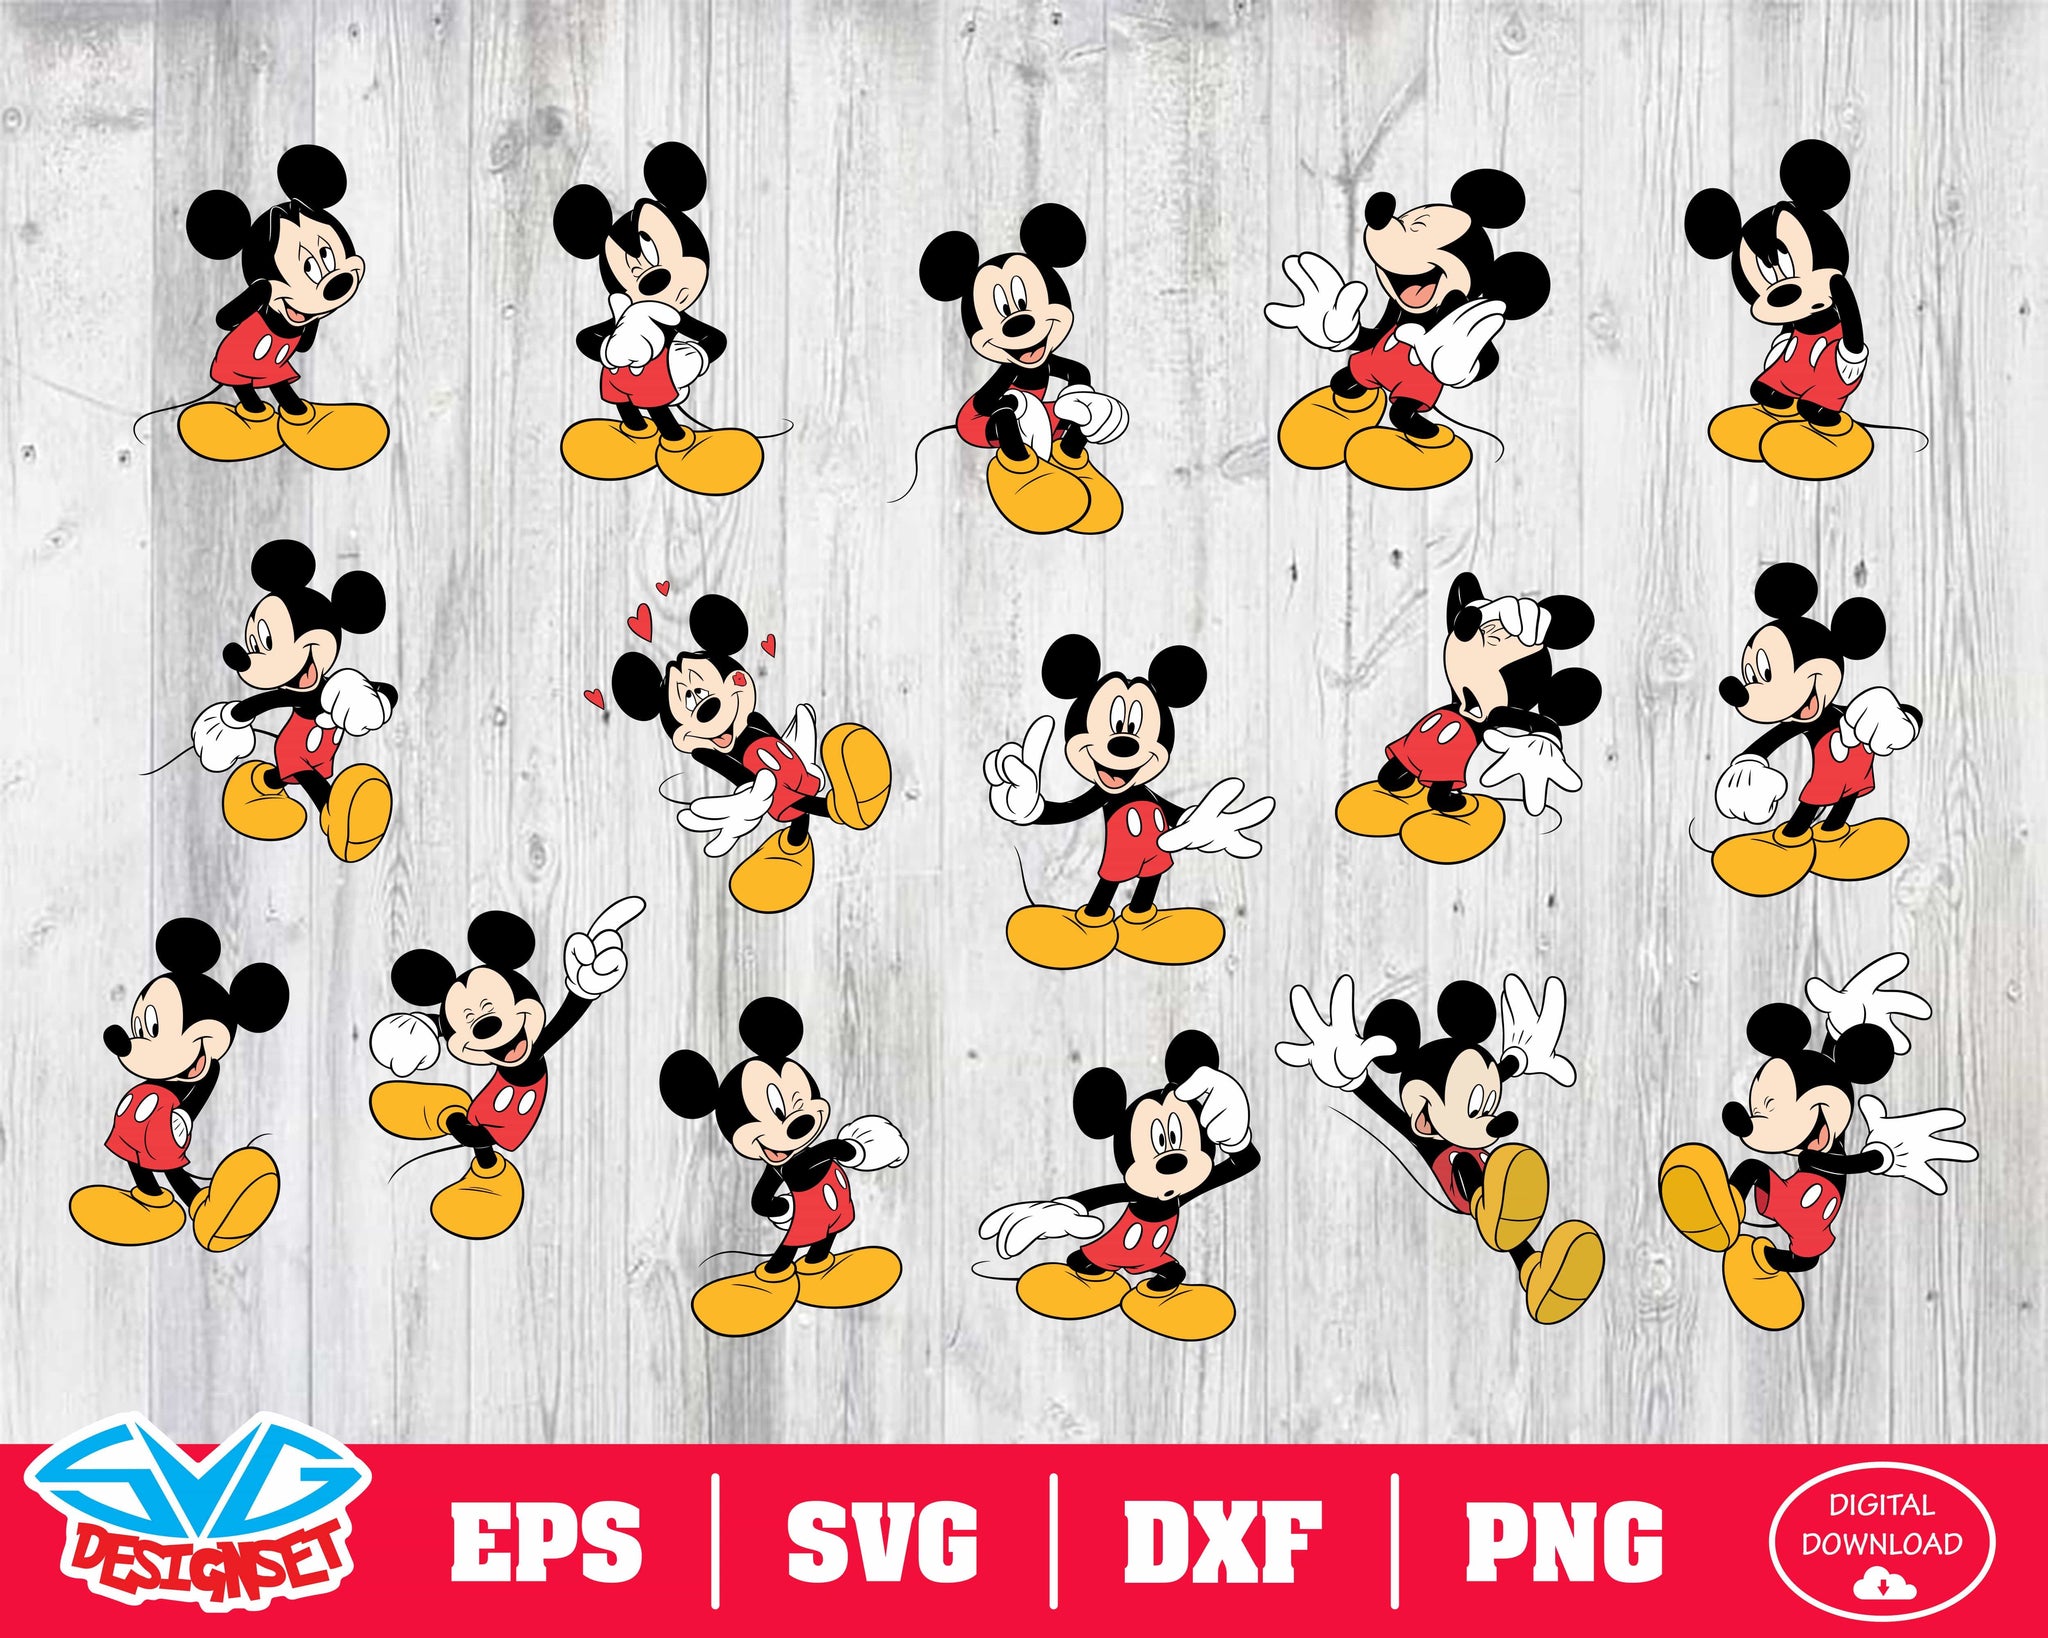 Mickey Mouse Svg, Dxf, Eps, Png, Clipart, Silhouette and Cutfiles #1 - SVGDesignSets